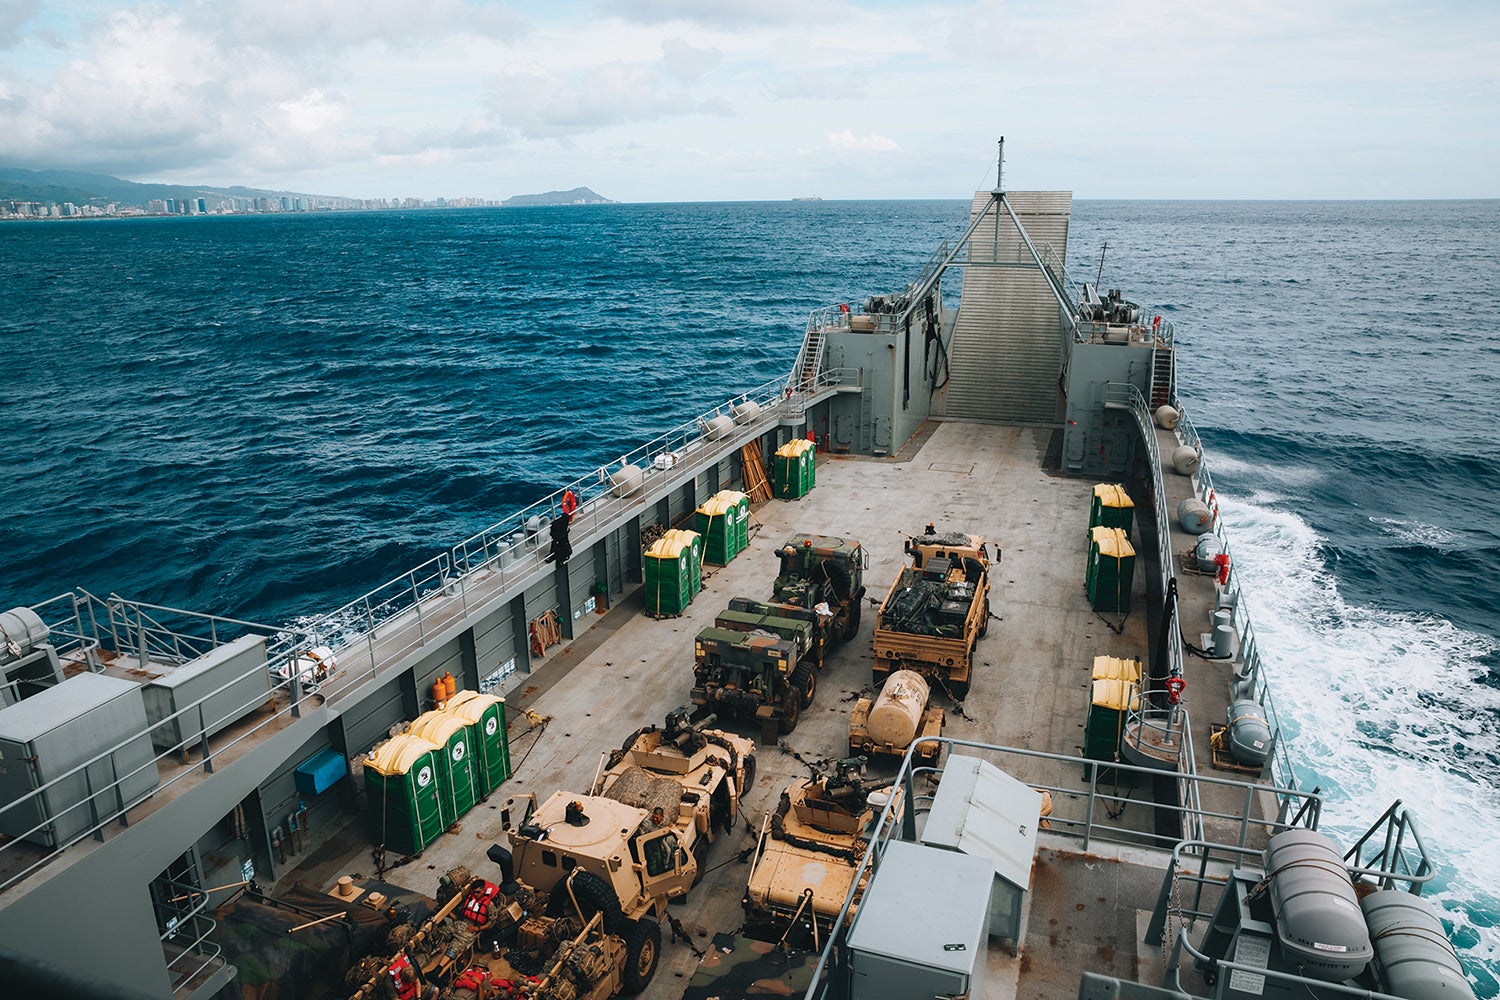 25th Infantry Division soldiers sail off of Hawaii aboard the Army’s Gen. Brehon B. Somervell Logistics Support Vessel. (Credit: U.S. Army/Spc. Rachel Christensen)